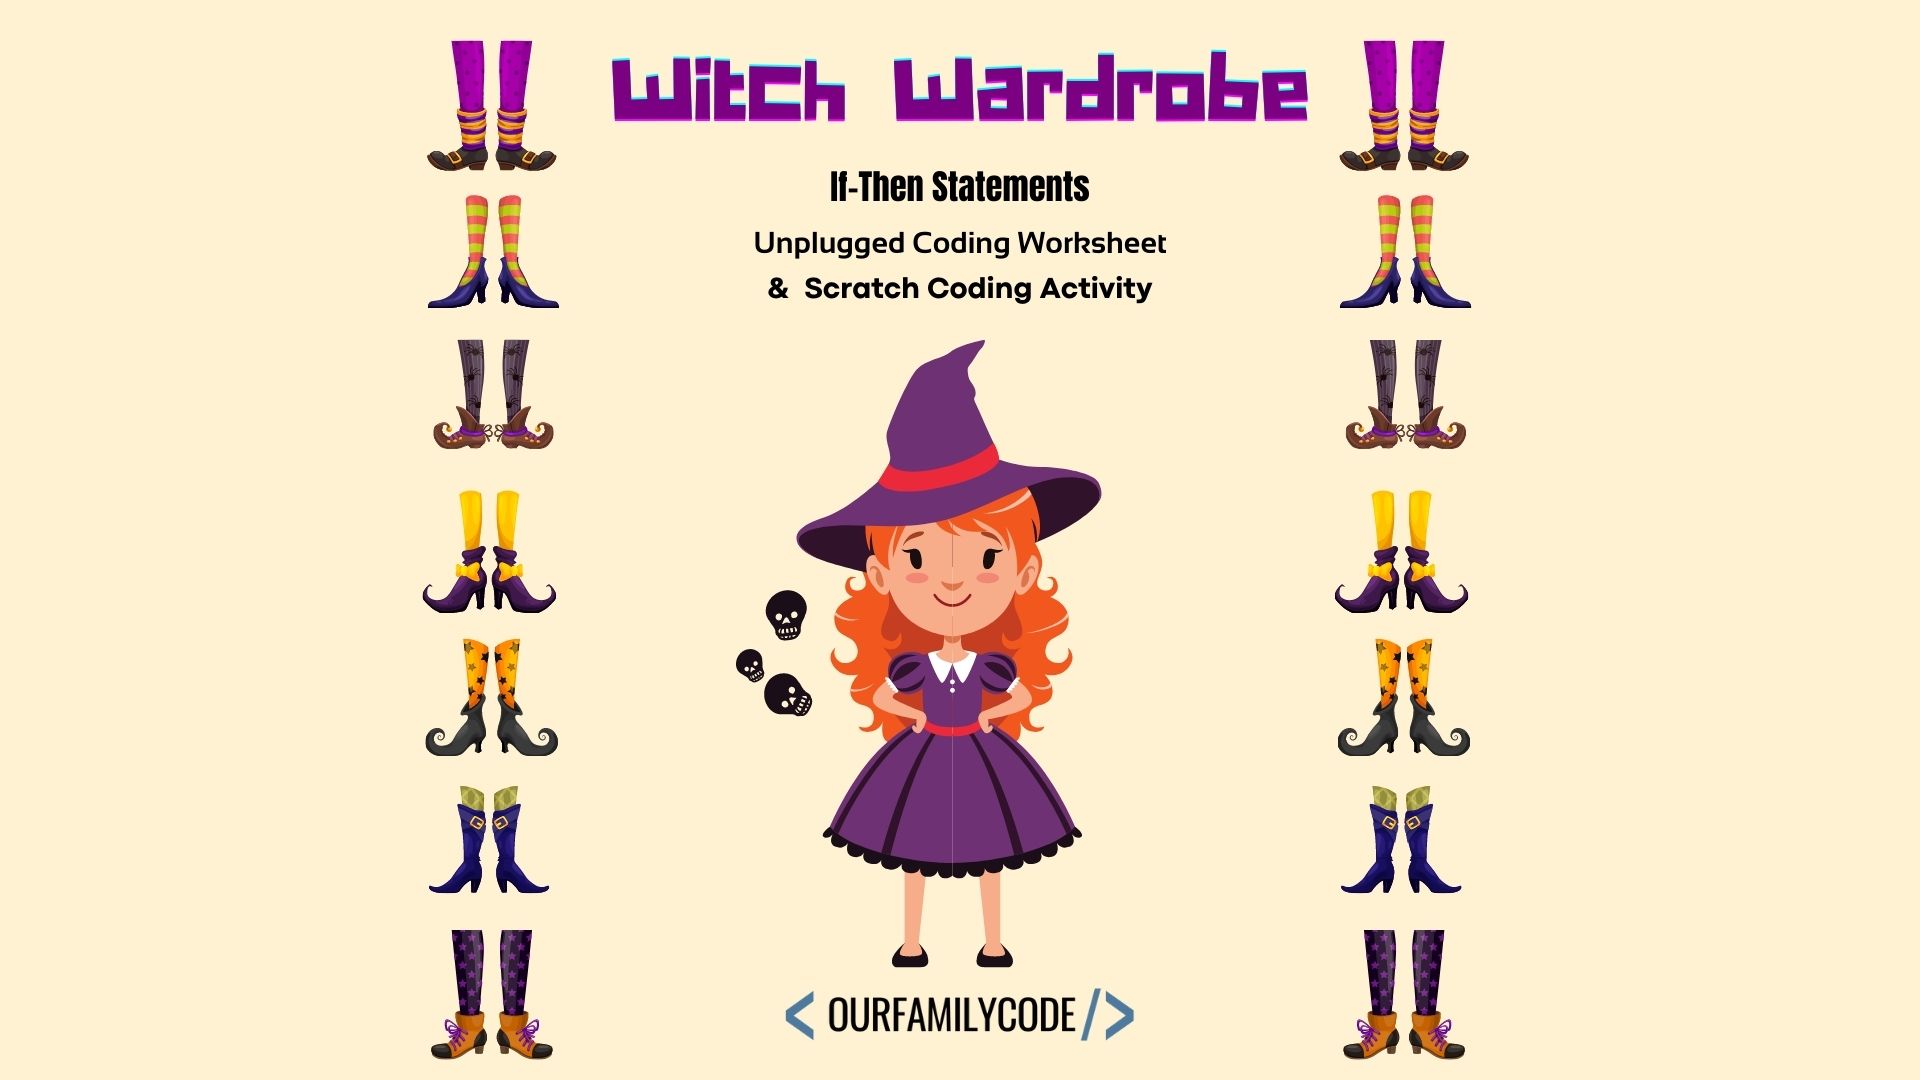 A picture of a friendly witch with seven different pairs of socks and shoes on a tan background with the text "Witch Wardrobe If-Then Statements Unplugged Coding Worksheet & Scratch Coding Activity" at the top.